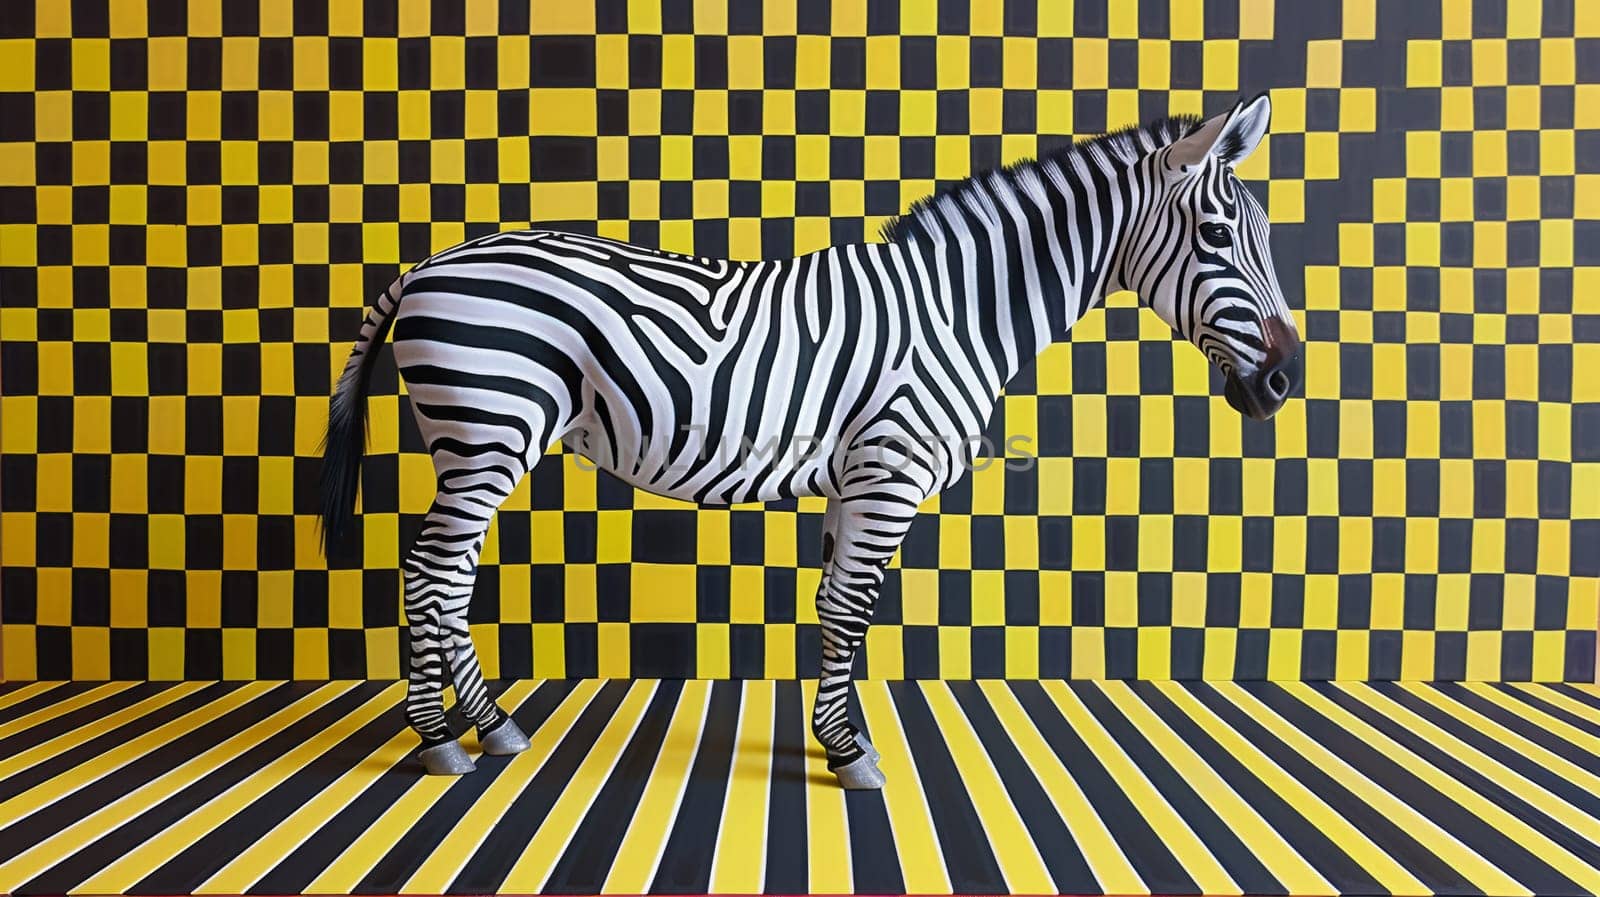 A zebra standing on a checkered floor in front of yellow and black background, AI by starush